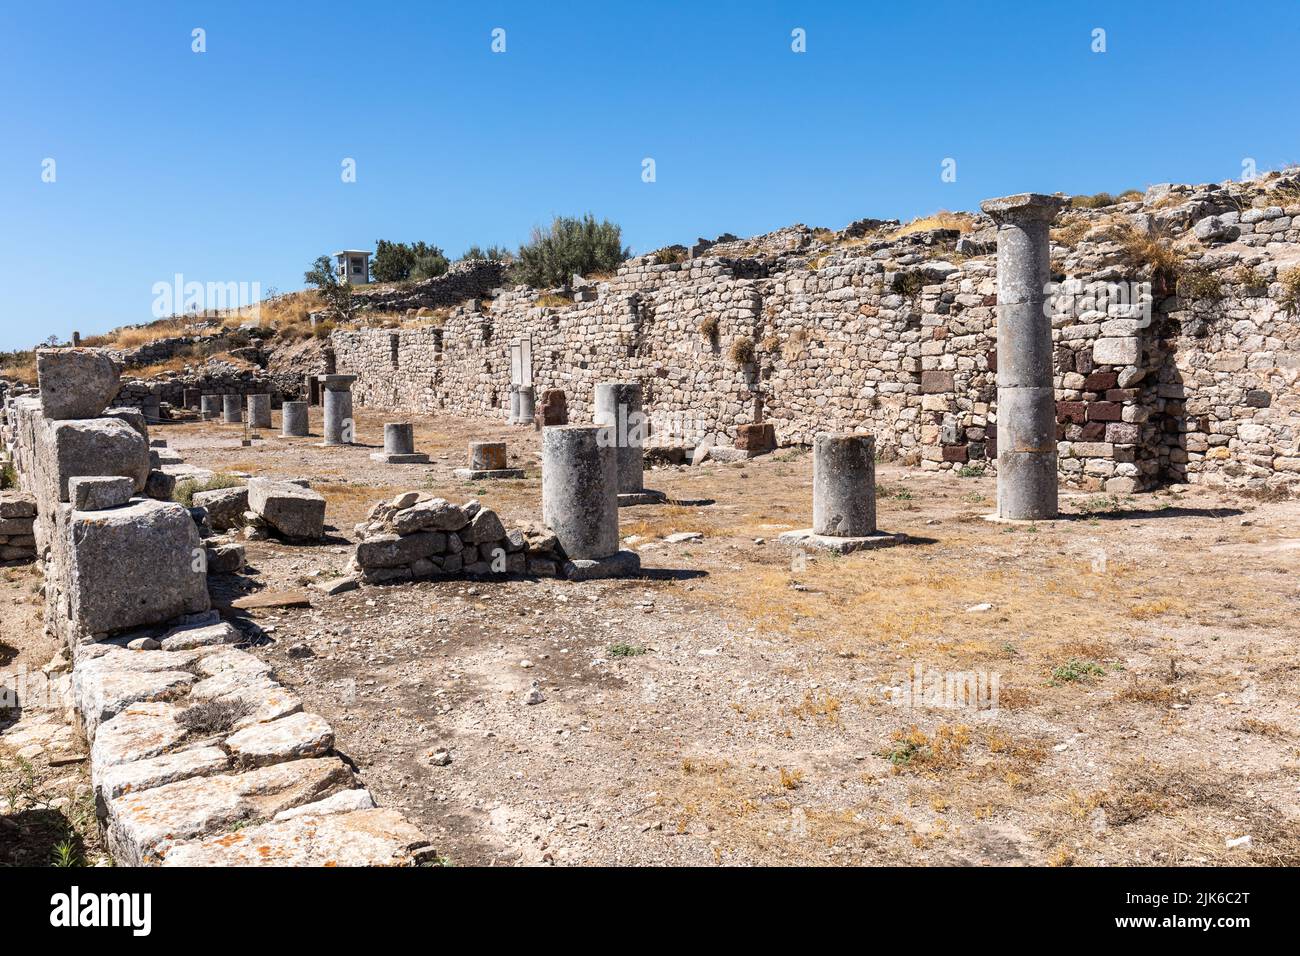 Sone pillars in the Archaeological Site of Ancient Thera in Santorini, Cyclades islands, Greece, Europe Stock Photo